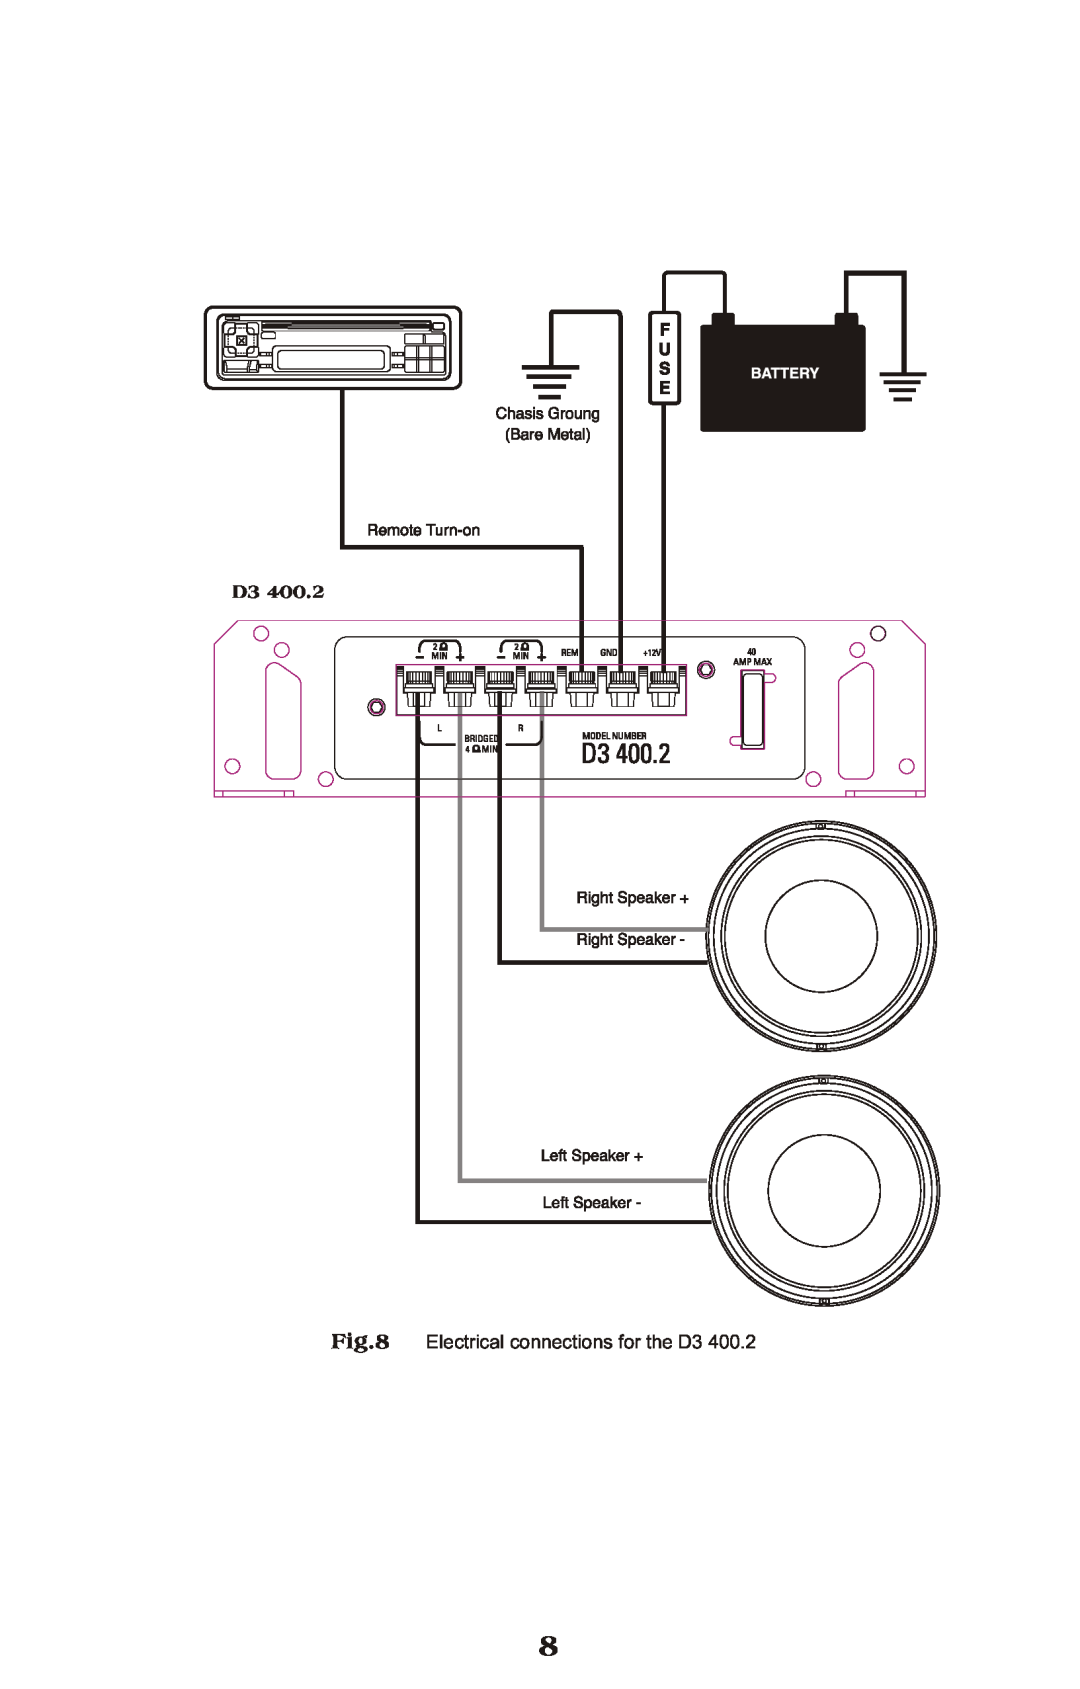 Diamond Audio Technology D3 Series specifications Electrical connections for the D3 